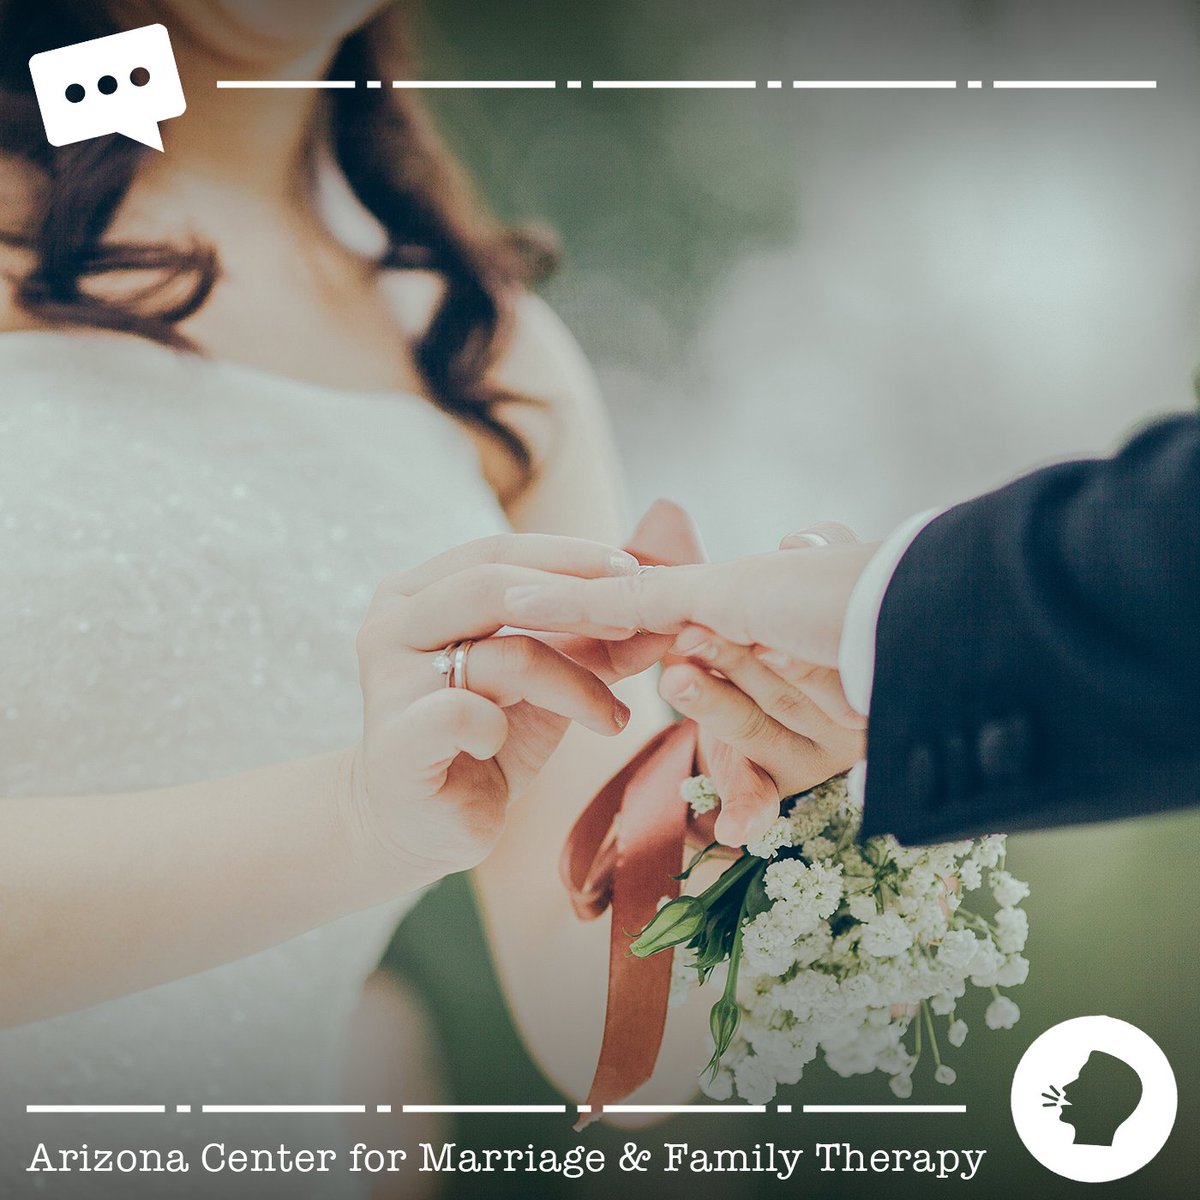 Our marriages can be the source of our greatest joy and our greatest pain. Arizona Center for MFT is here to help you deal with ups and downs of marriage!
#AZcenterformft #CoupleCounseling #Marriage